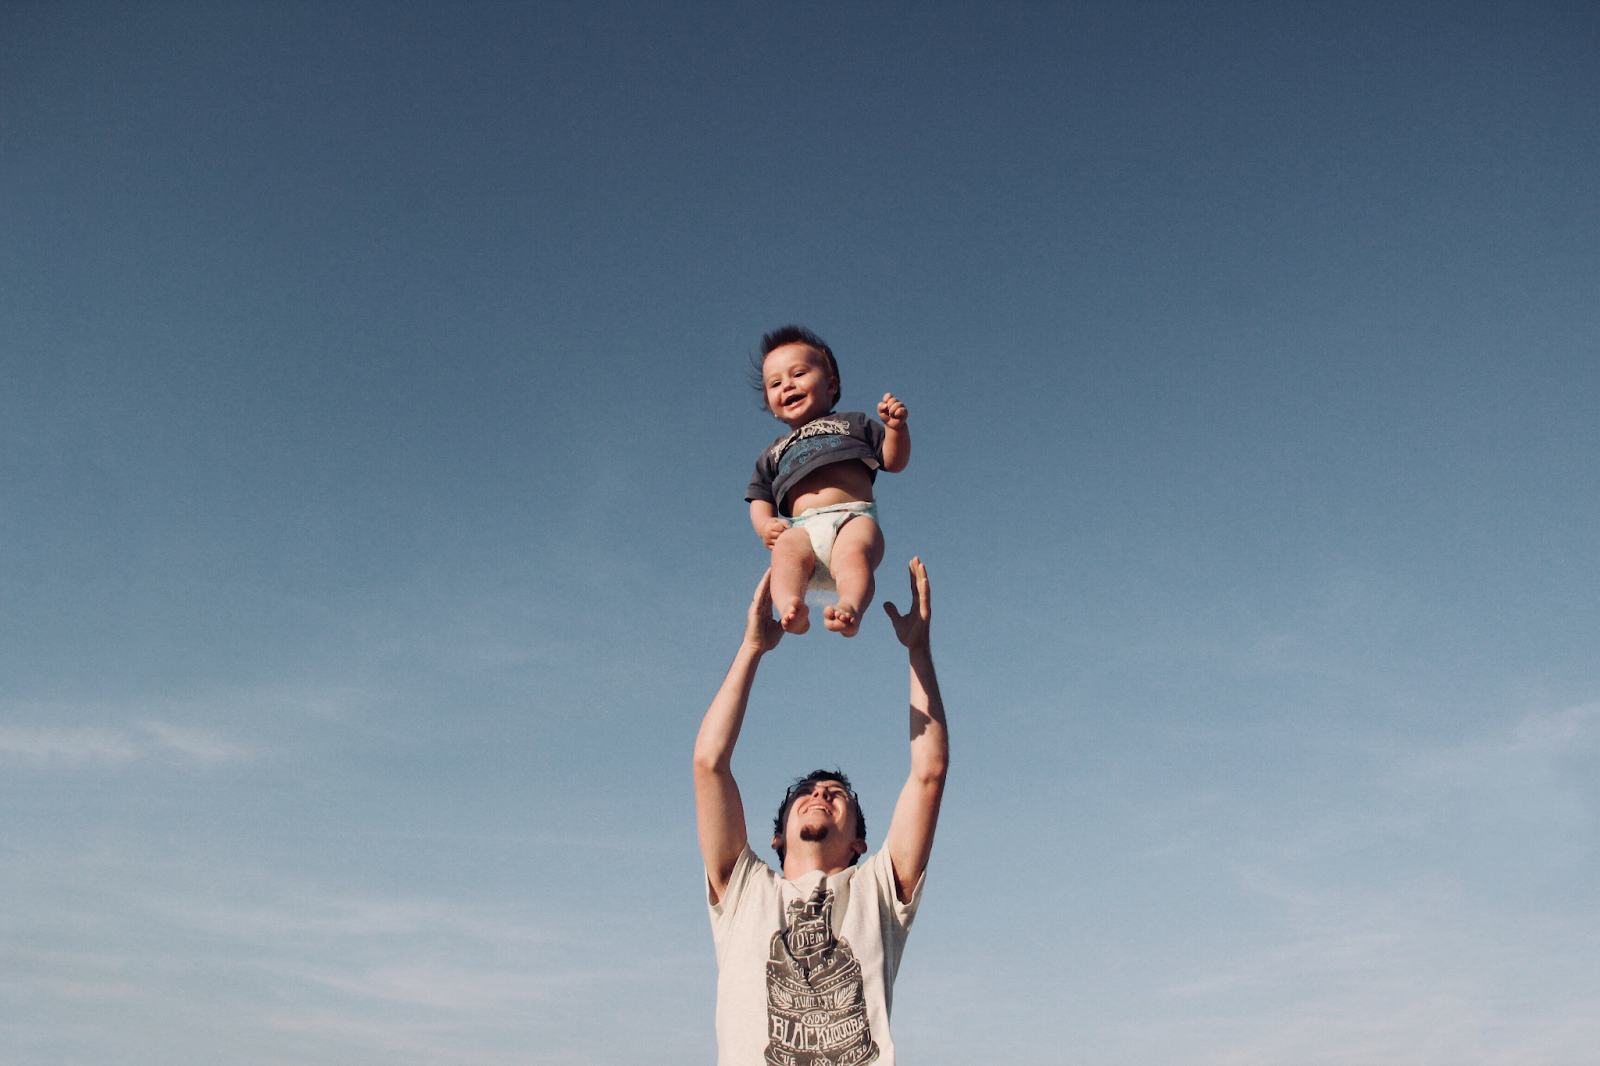 dad throwing kid in air, playing with kids, fatherhood, fit dad, strong dad, strength